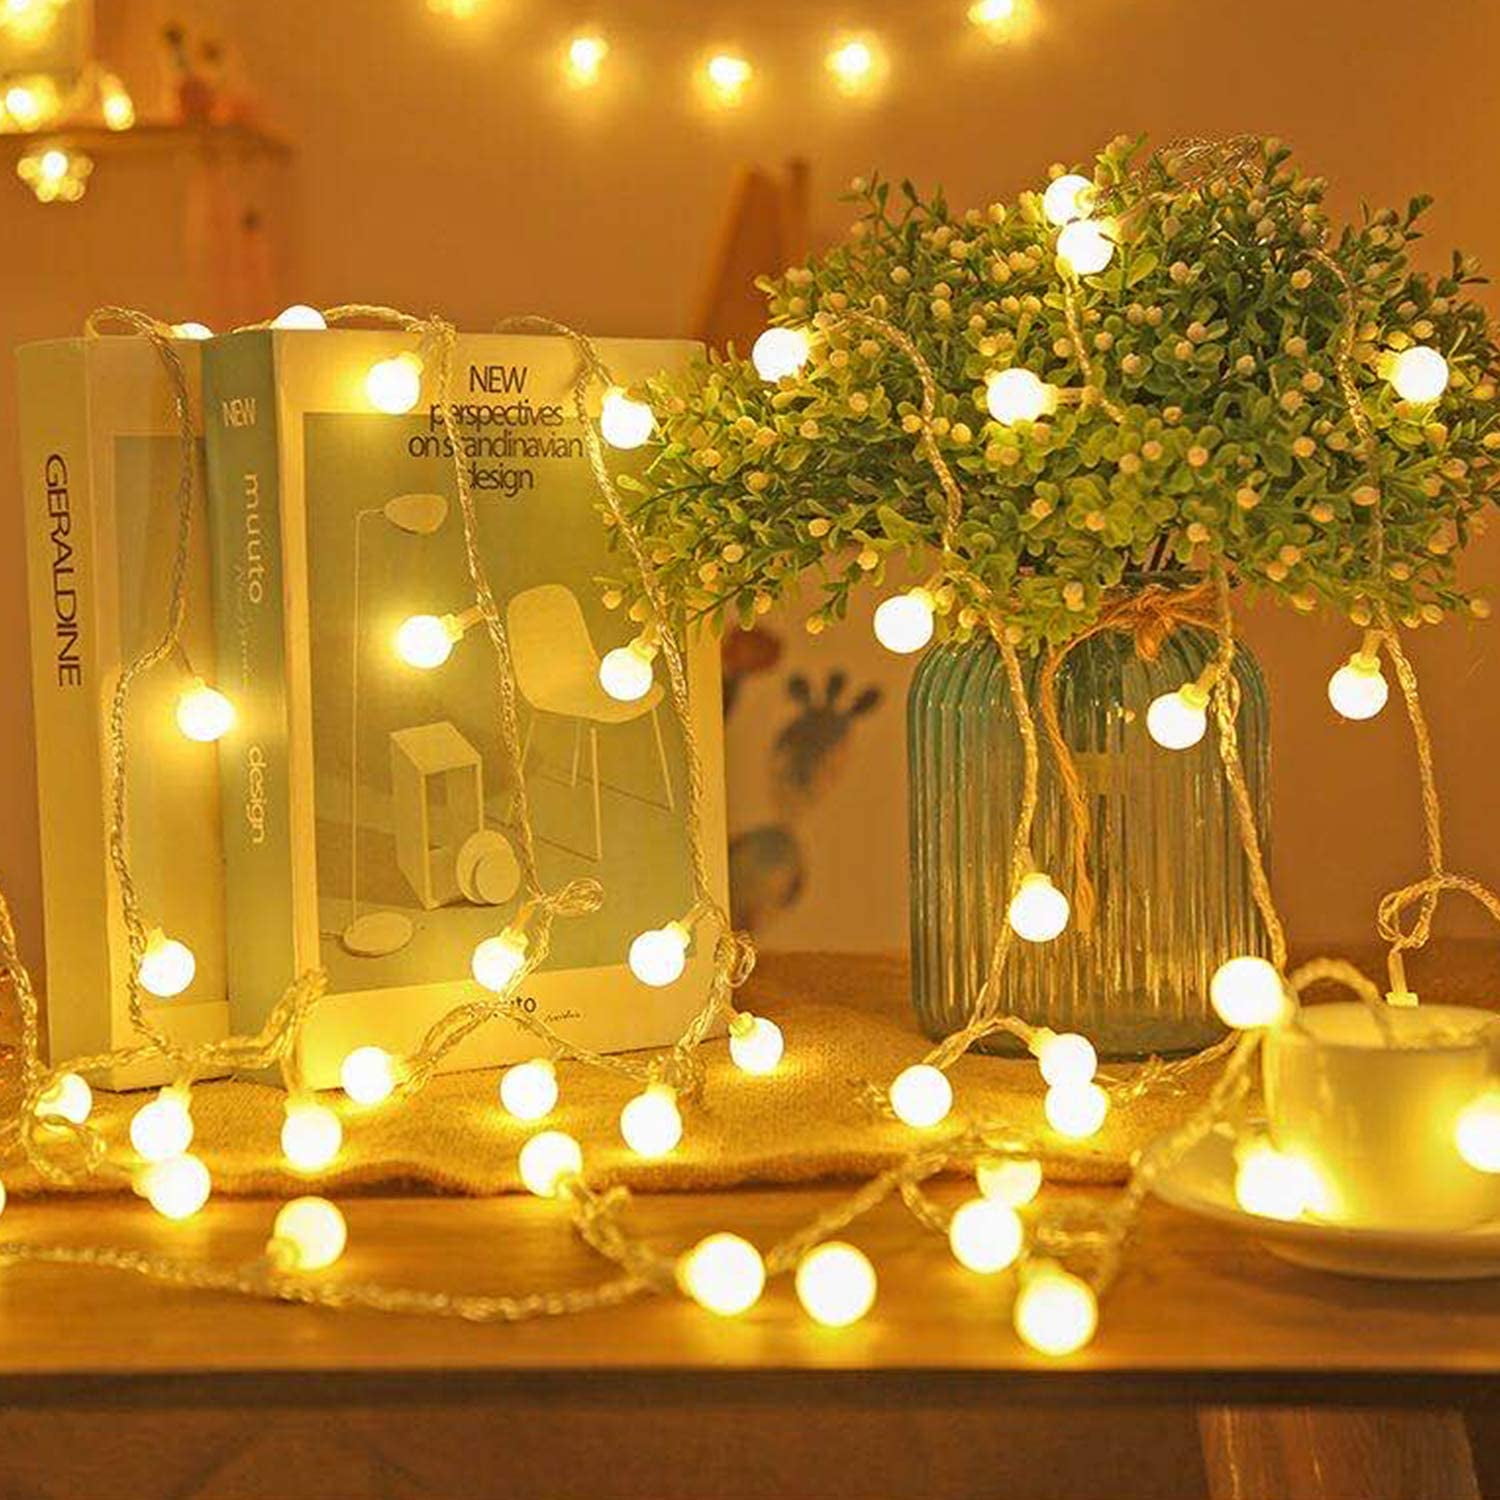 Details about   100 LED Fairy String Lights Waterproof For Christmas Tree Garden Outdoor Qy 